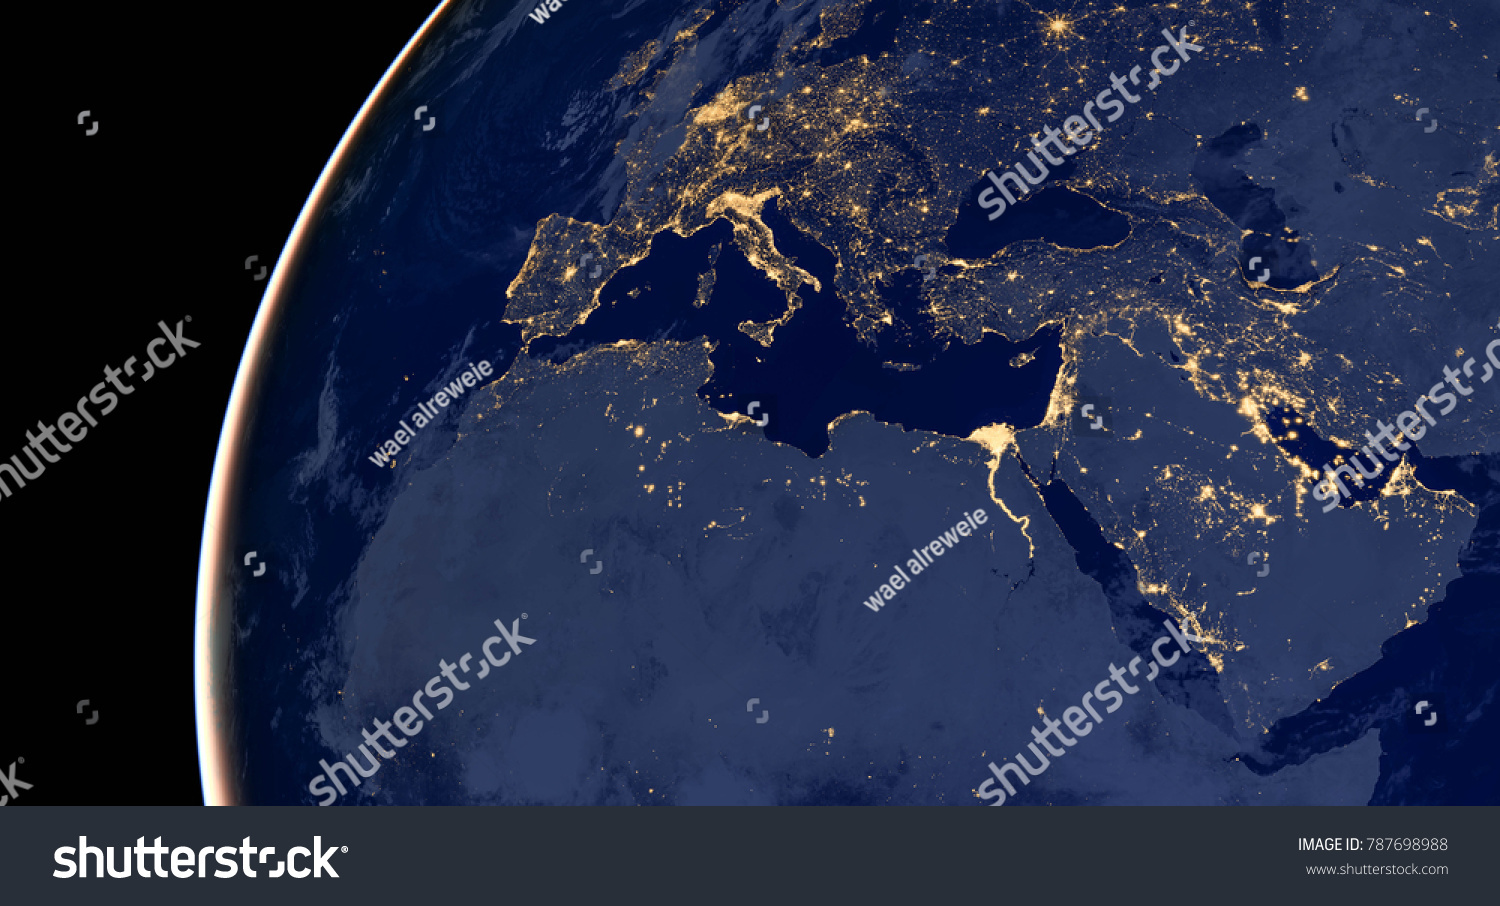 Middle east, west asia, east europe lights during night as it looks like from space. Elements of this image are furnished by NASA. #787698988